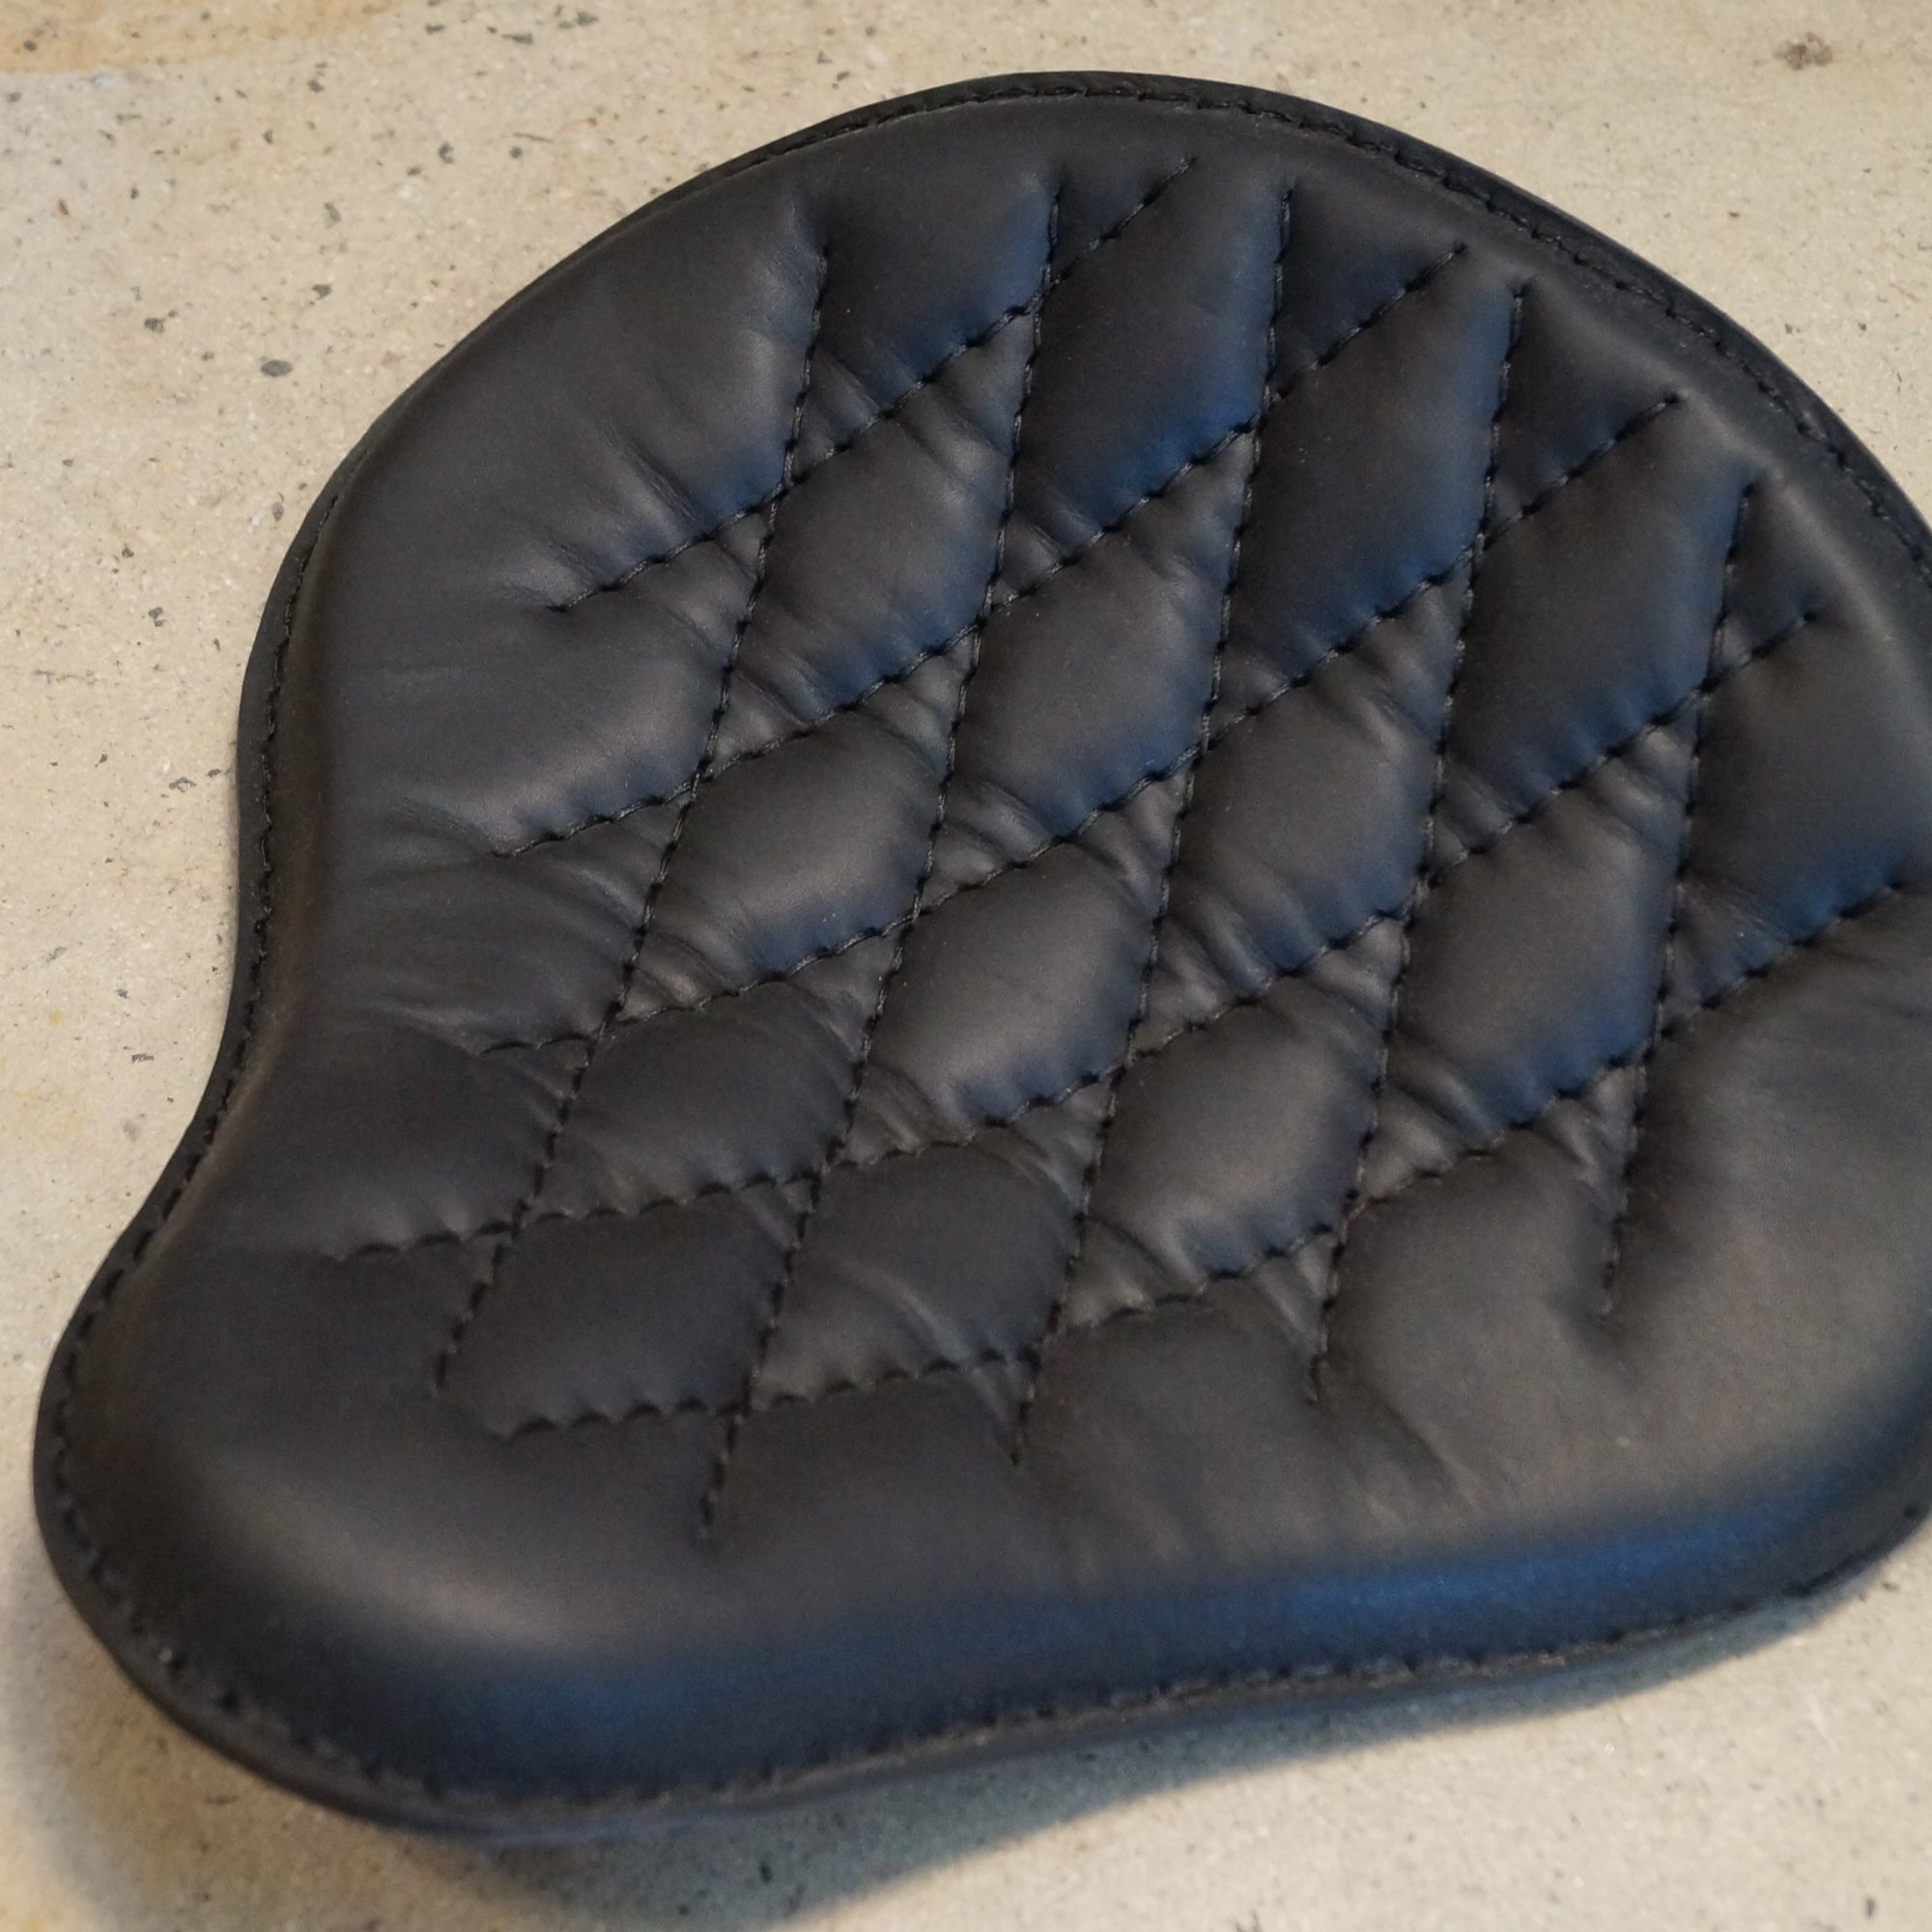 Bobber Seat Alex Leather Rogue Motorcycles